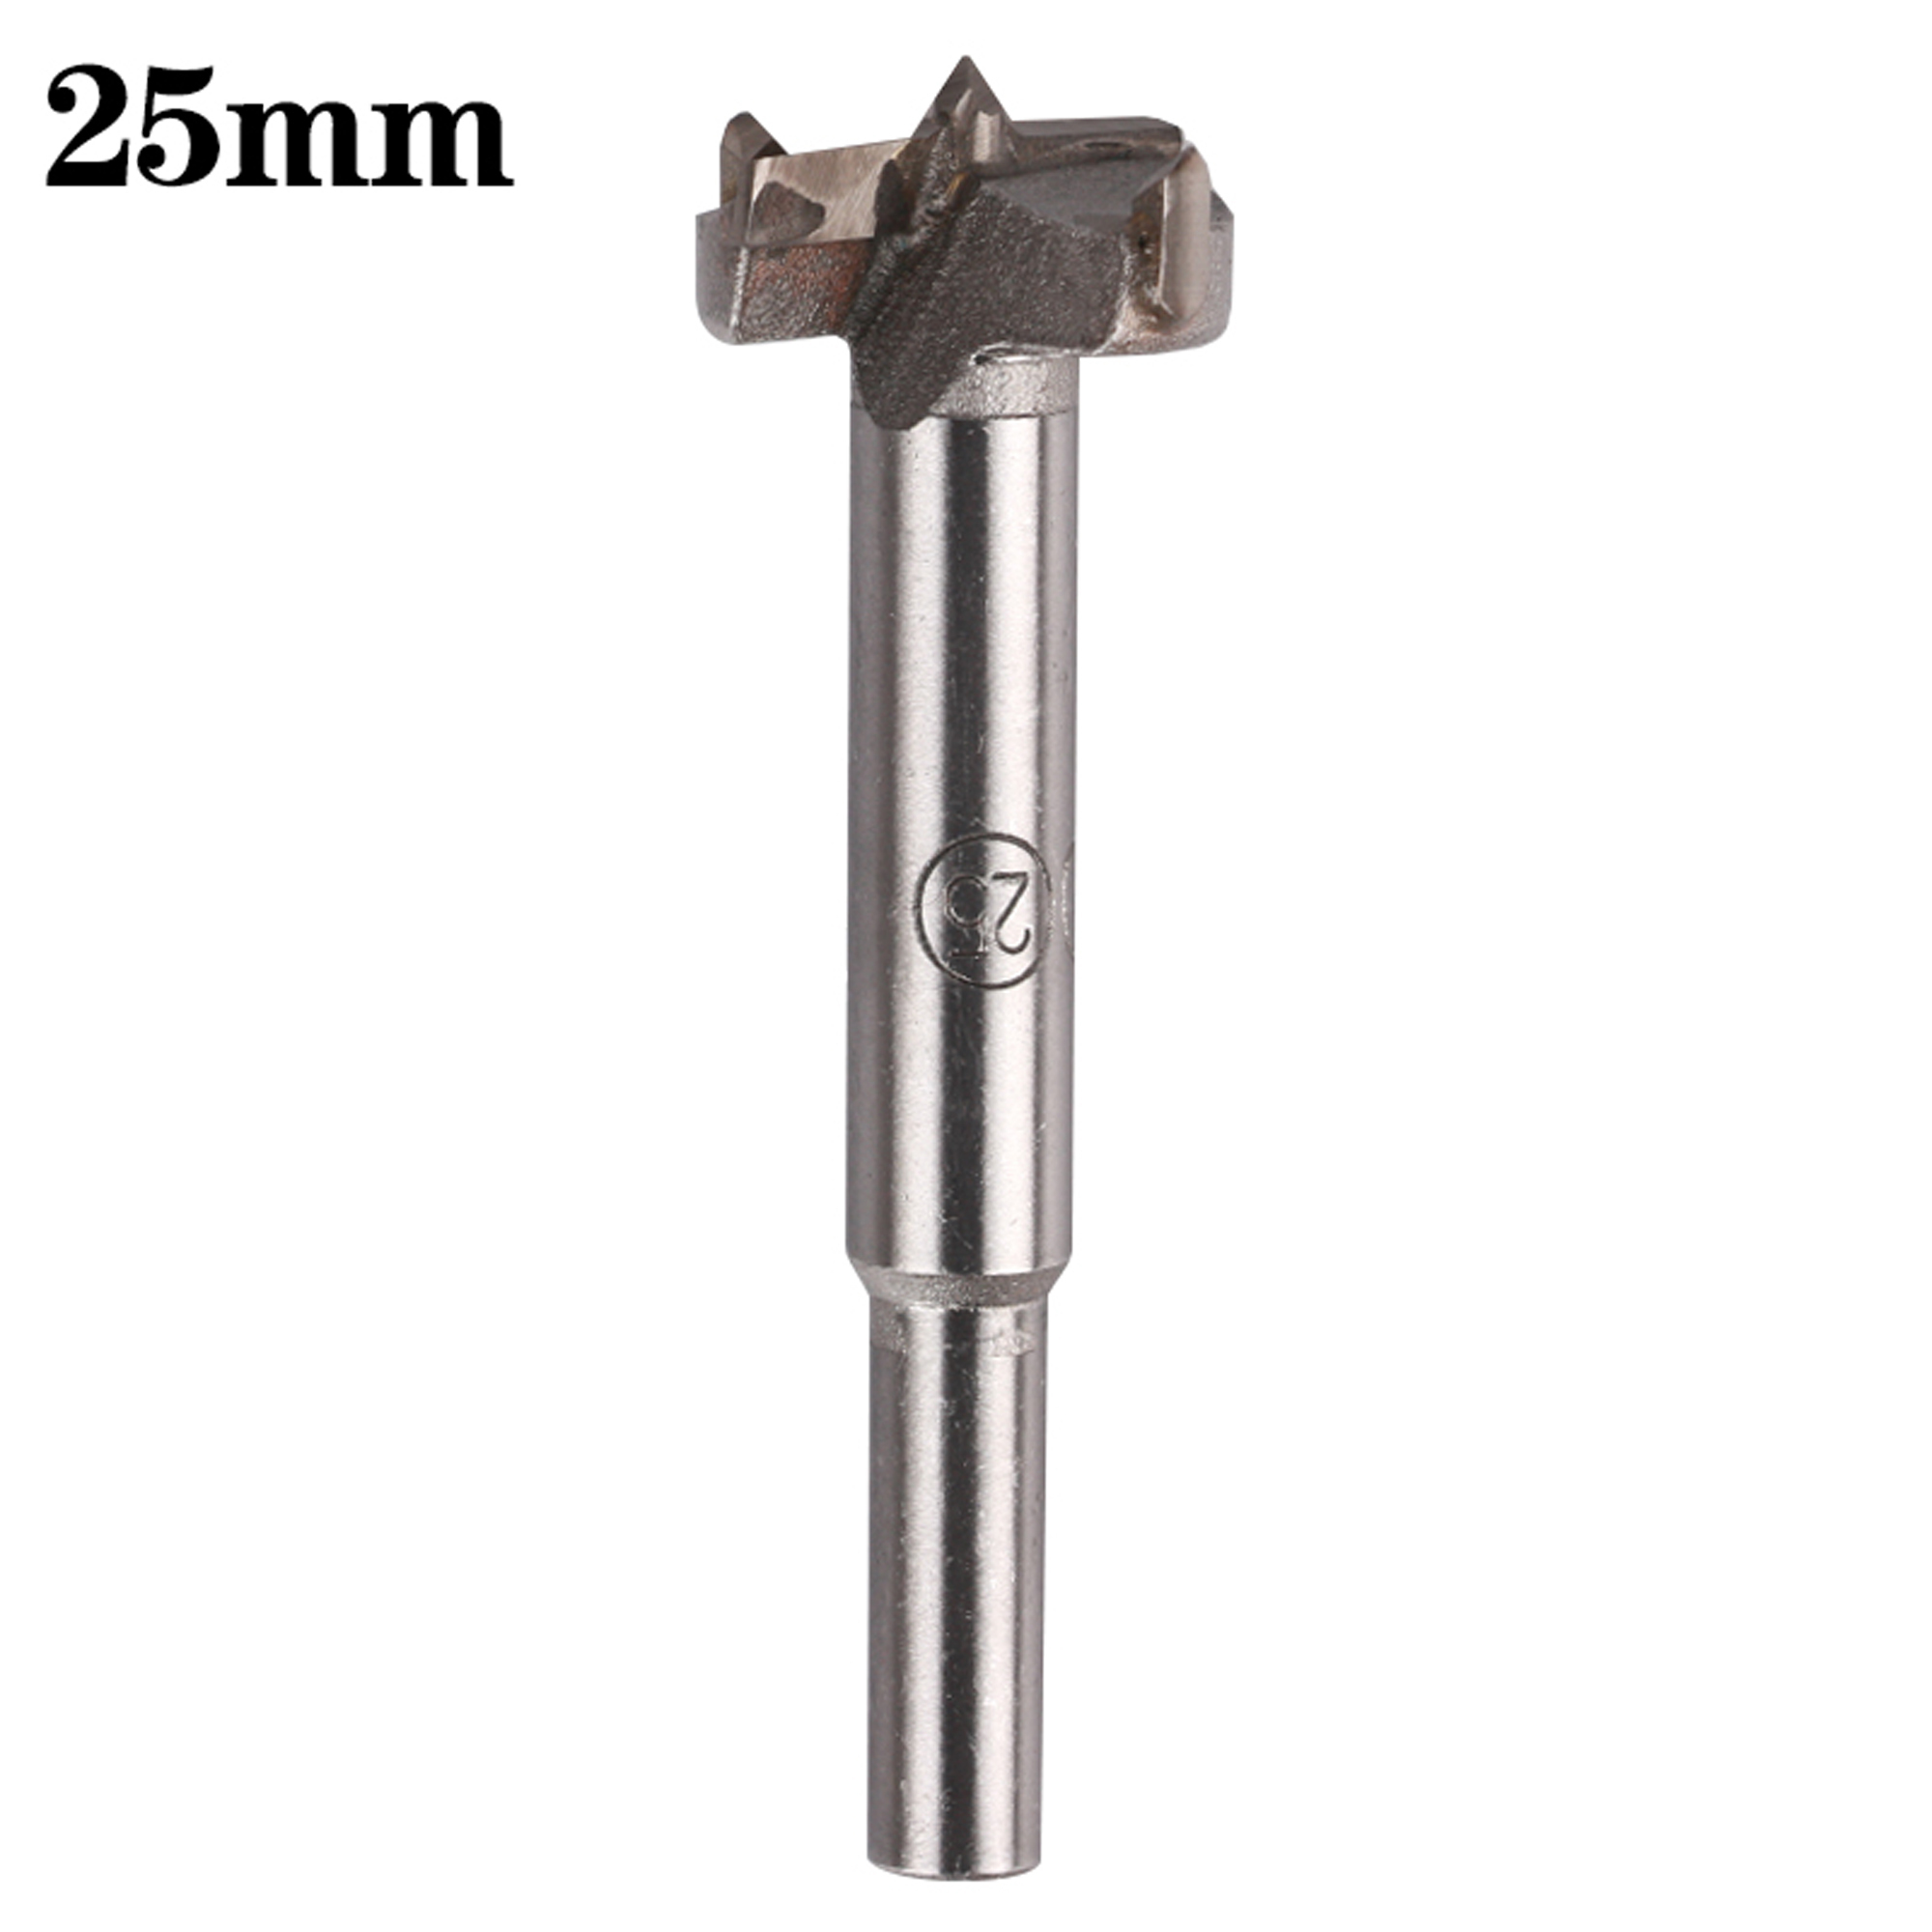 US Stock 48mm Wood Hole Saw Cutter Boring Drill Bit DIY Woodworking Tool 